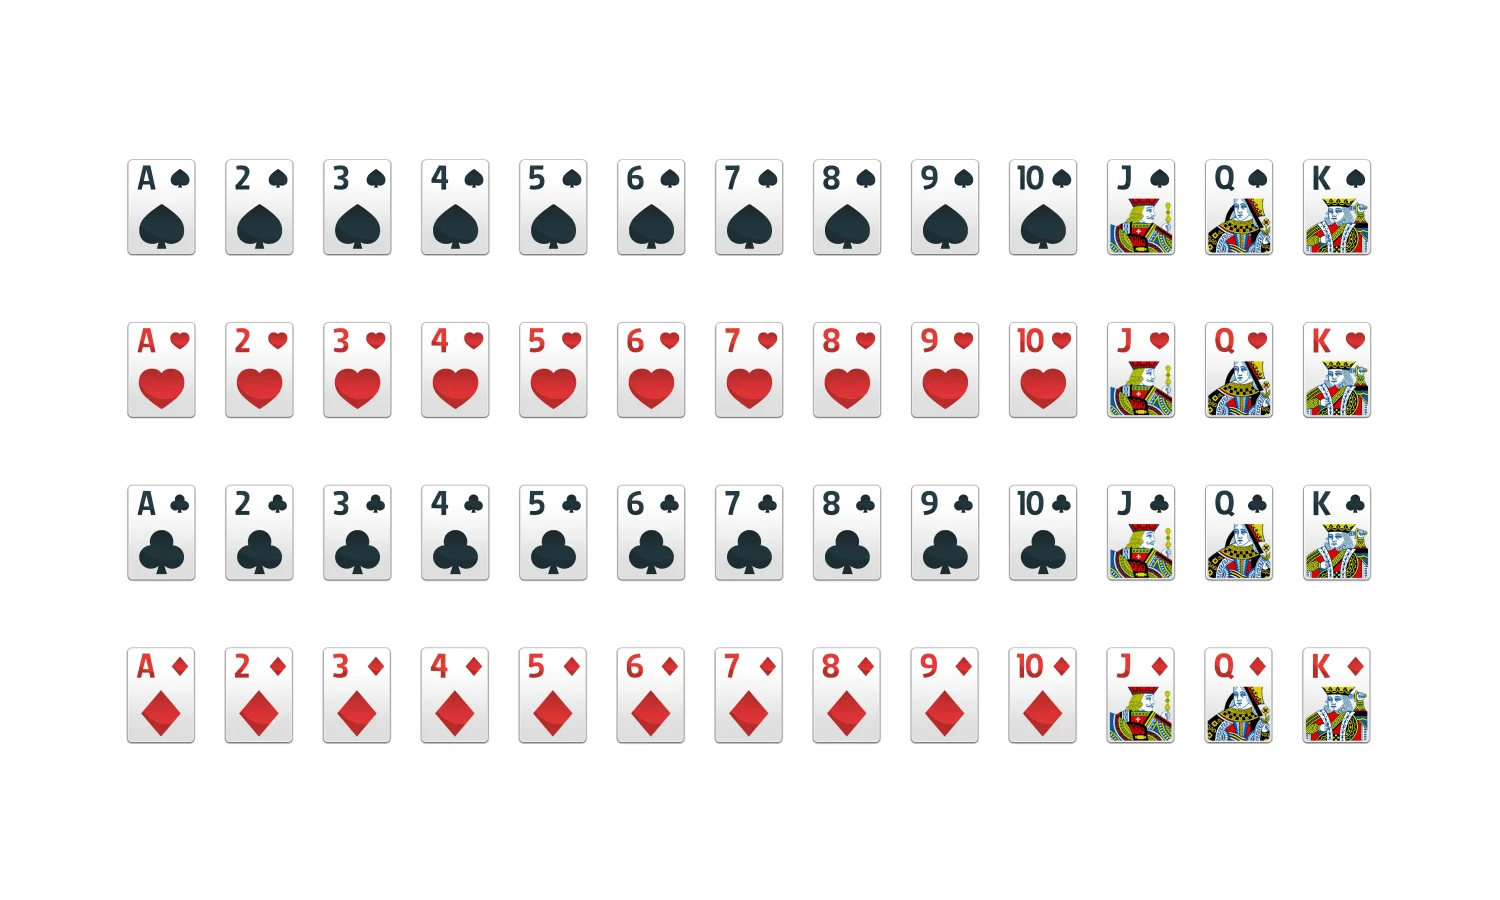 Solitaire Rules: Win